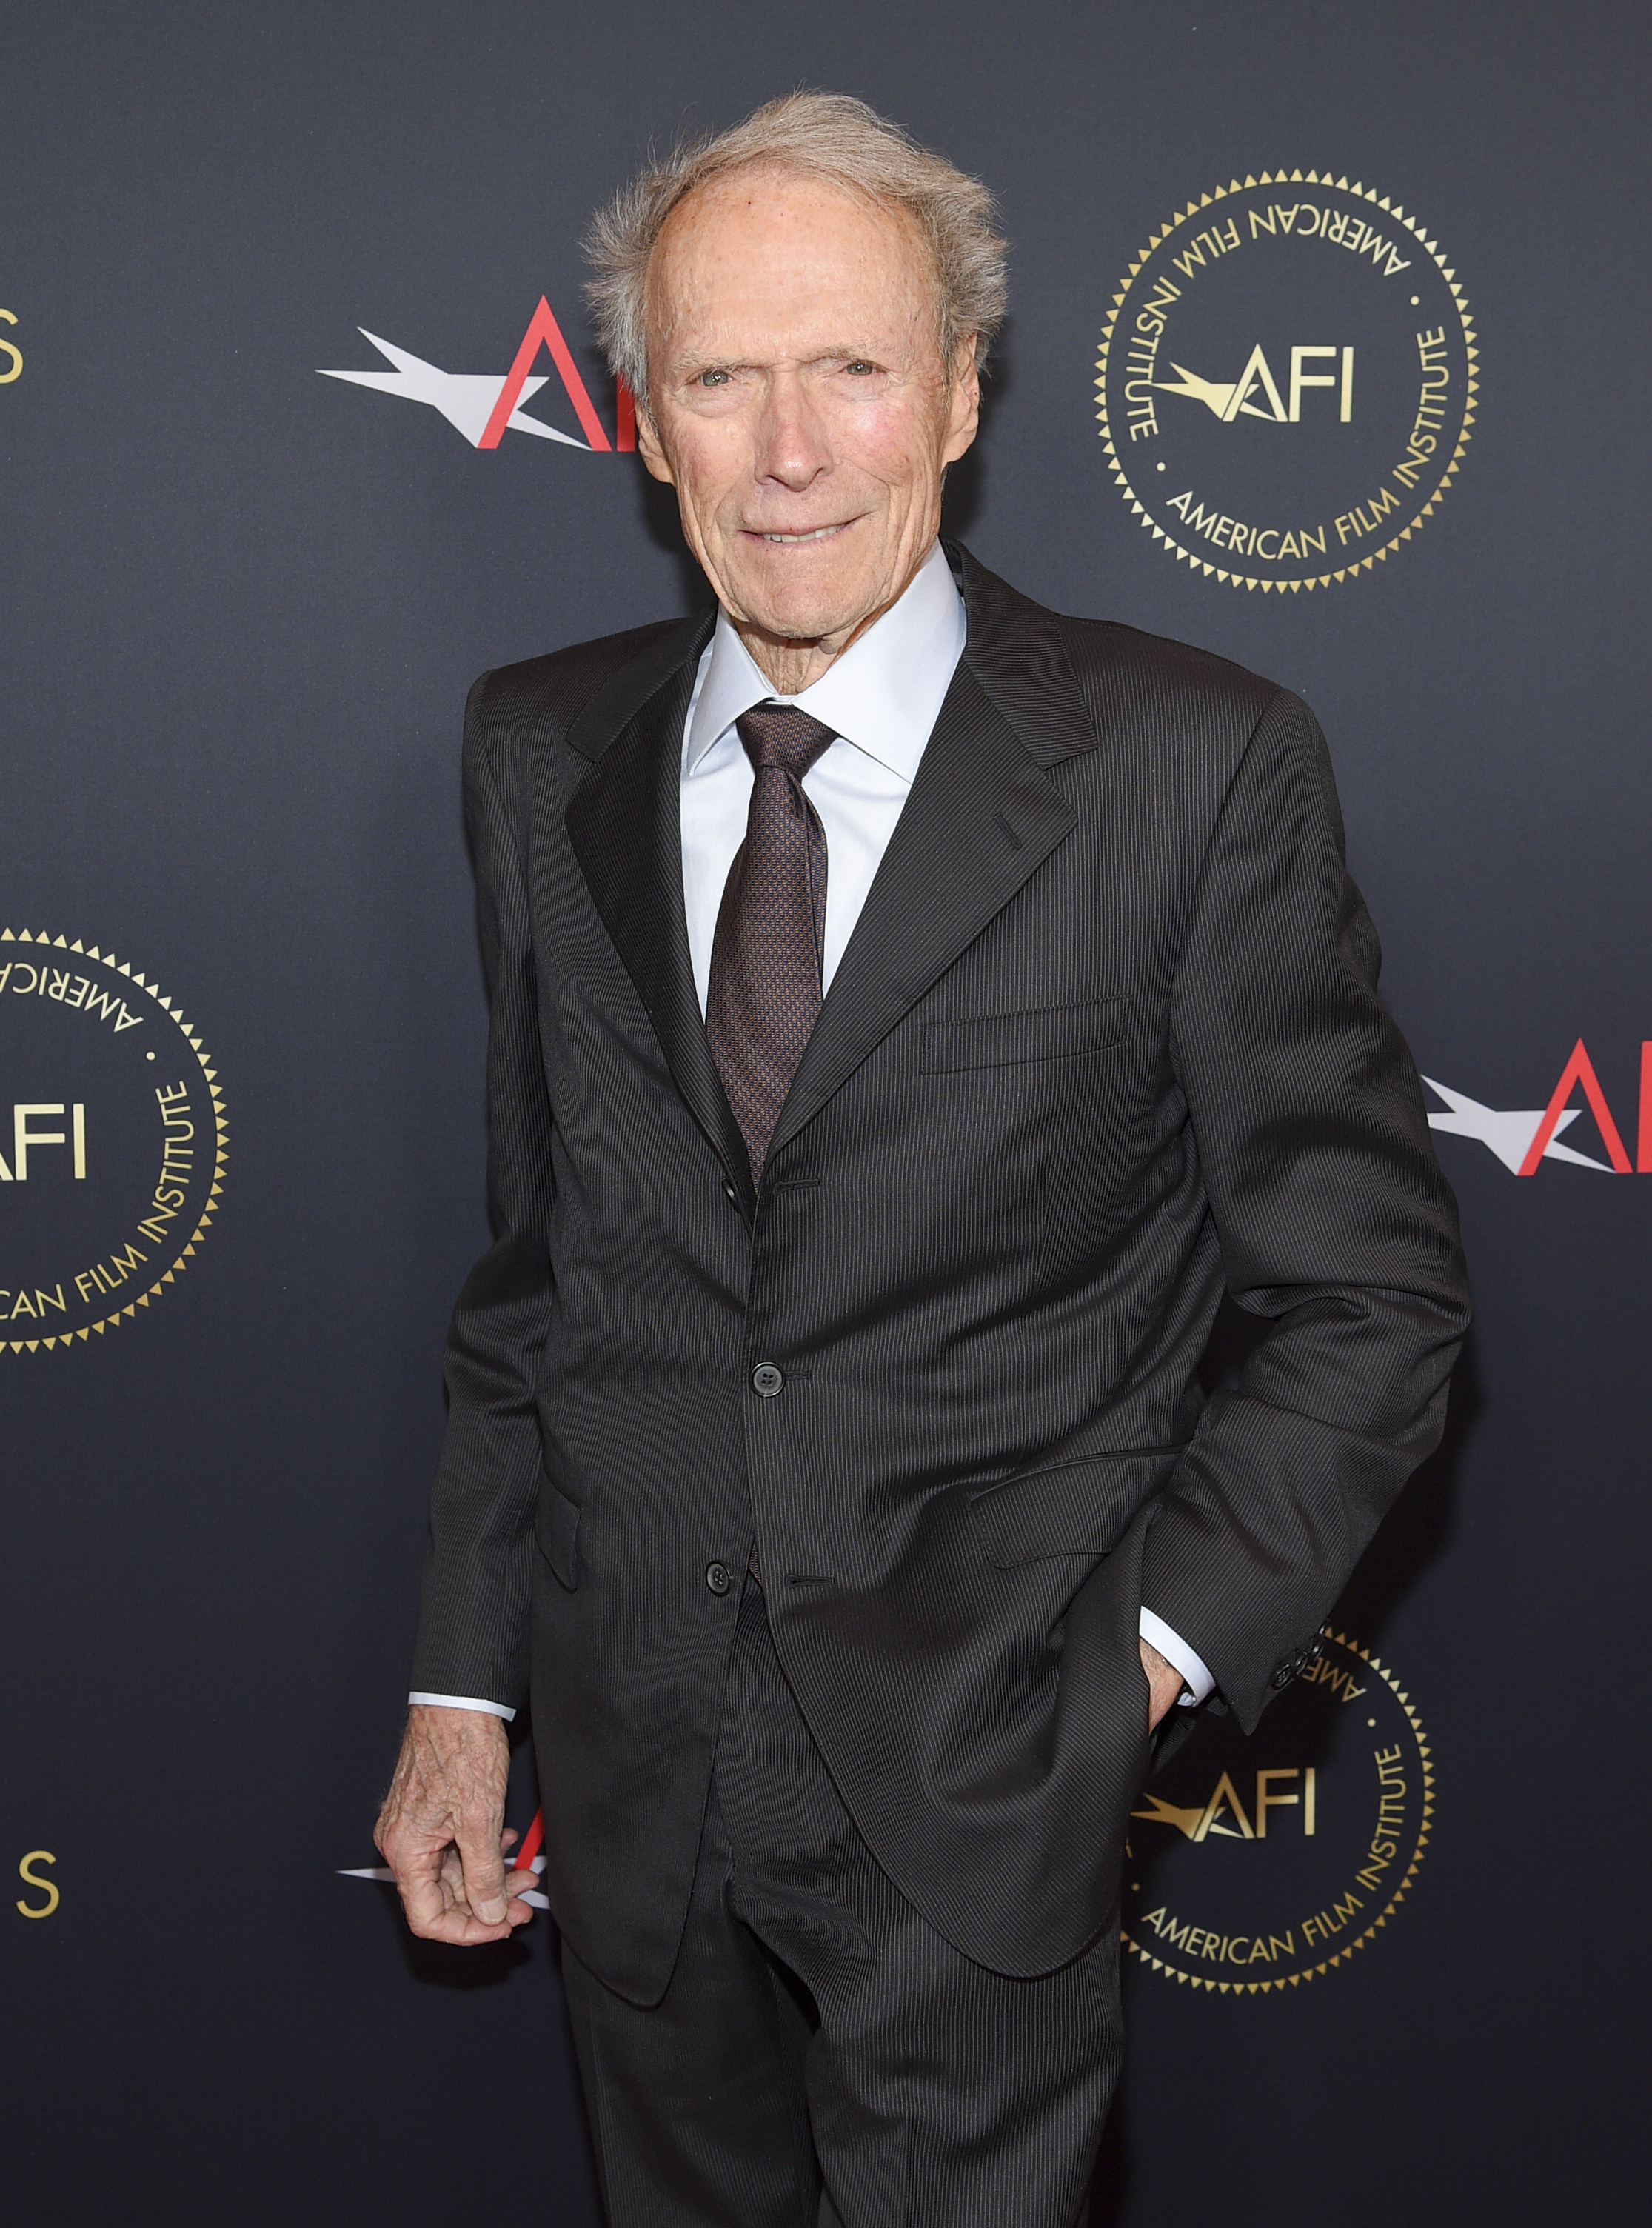 Clint Eastwood at the AFI Awards Luncheon, Arrivals, Four Seasons Hotel in LA in 2020 | Source: Getty Images